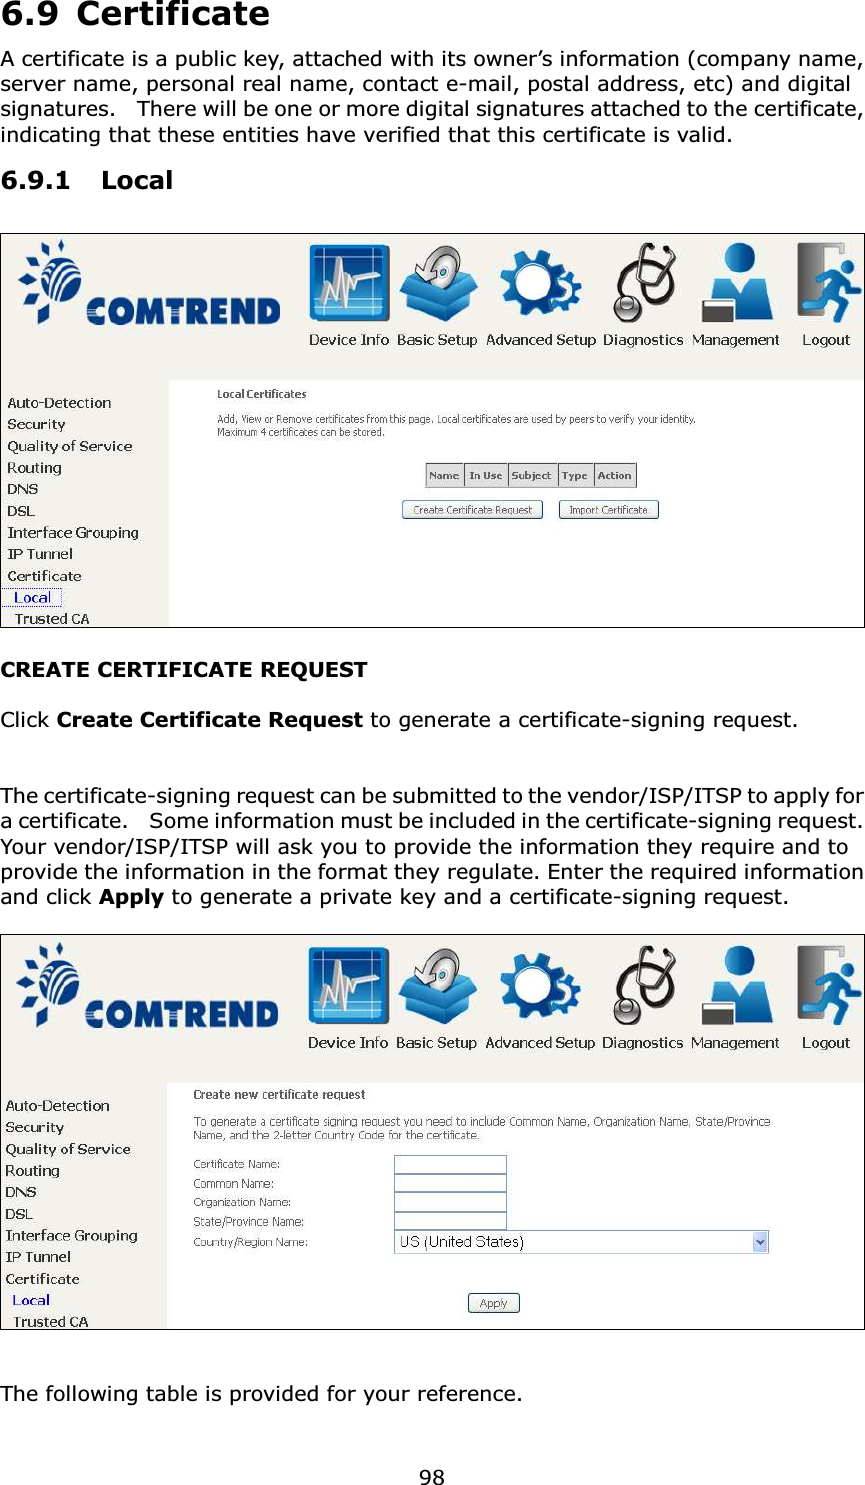  986.9 Certificate A certificate is a public key, attached with its owner’s information (company name, server name, personal real name, contact e-mail, postal address, etc) and digital signatures.    There will be one or more digital signatures attached to the certificate, indicating that these entities have verified that this certificate is valid. 6.9.1 Local  CREATE CERTIFICATE REQUEST  Click Create Certificate Request to generate a certificate-signing request.     The certificate-signing request can be submitted to the vendor/ISP/ITSP to apply for a certificate.    Some information must be included in the certificate-signing request.   Your vendor/ISP/ITSP will ask you to provide the information they require and to provide the information in the format they regulate. Enter the required information and click Apply to generate a private key and a certificate-signing request.         The following table is provided for your reference.  